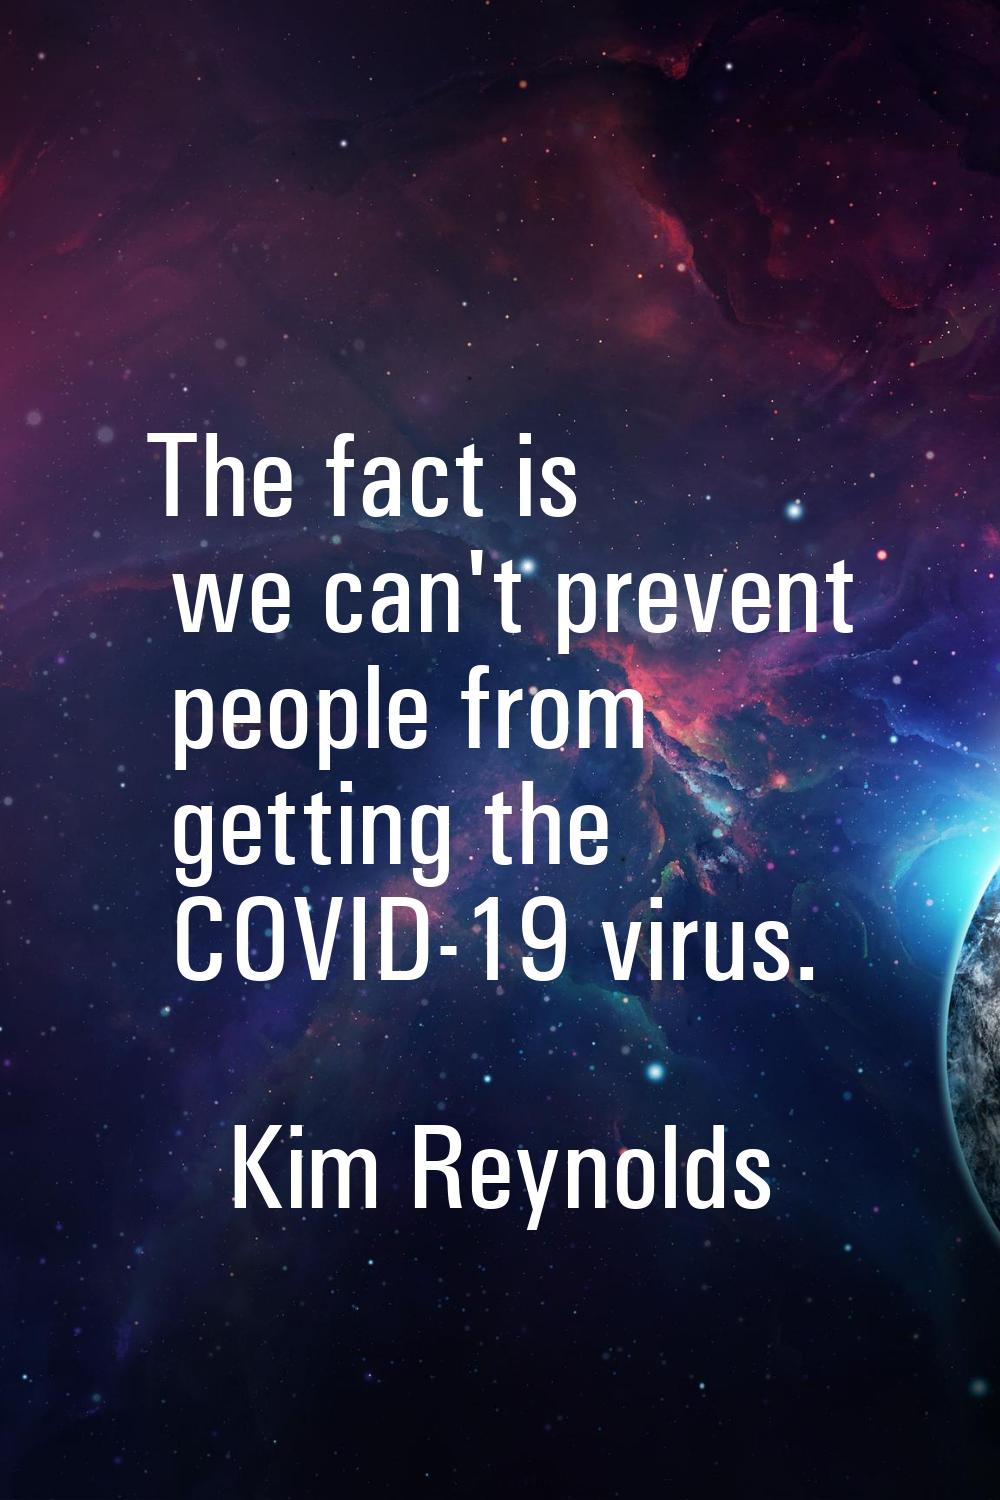 The fact is we can't prevent people from getting the COVID-19 virus.